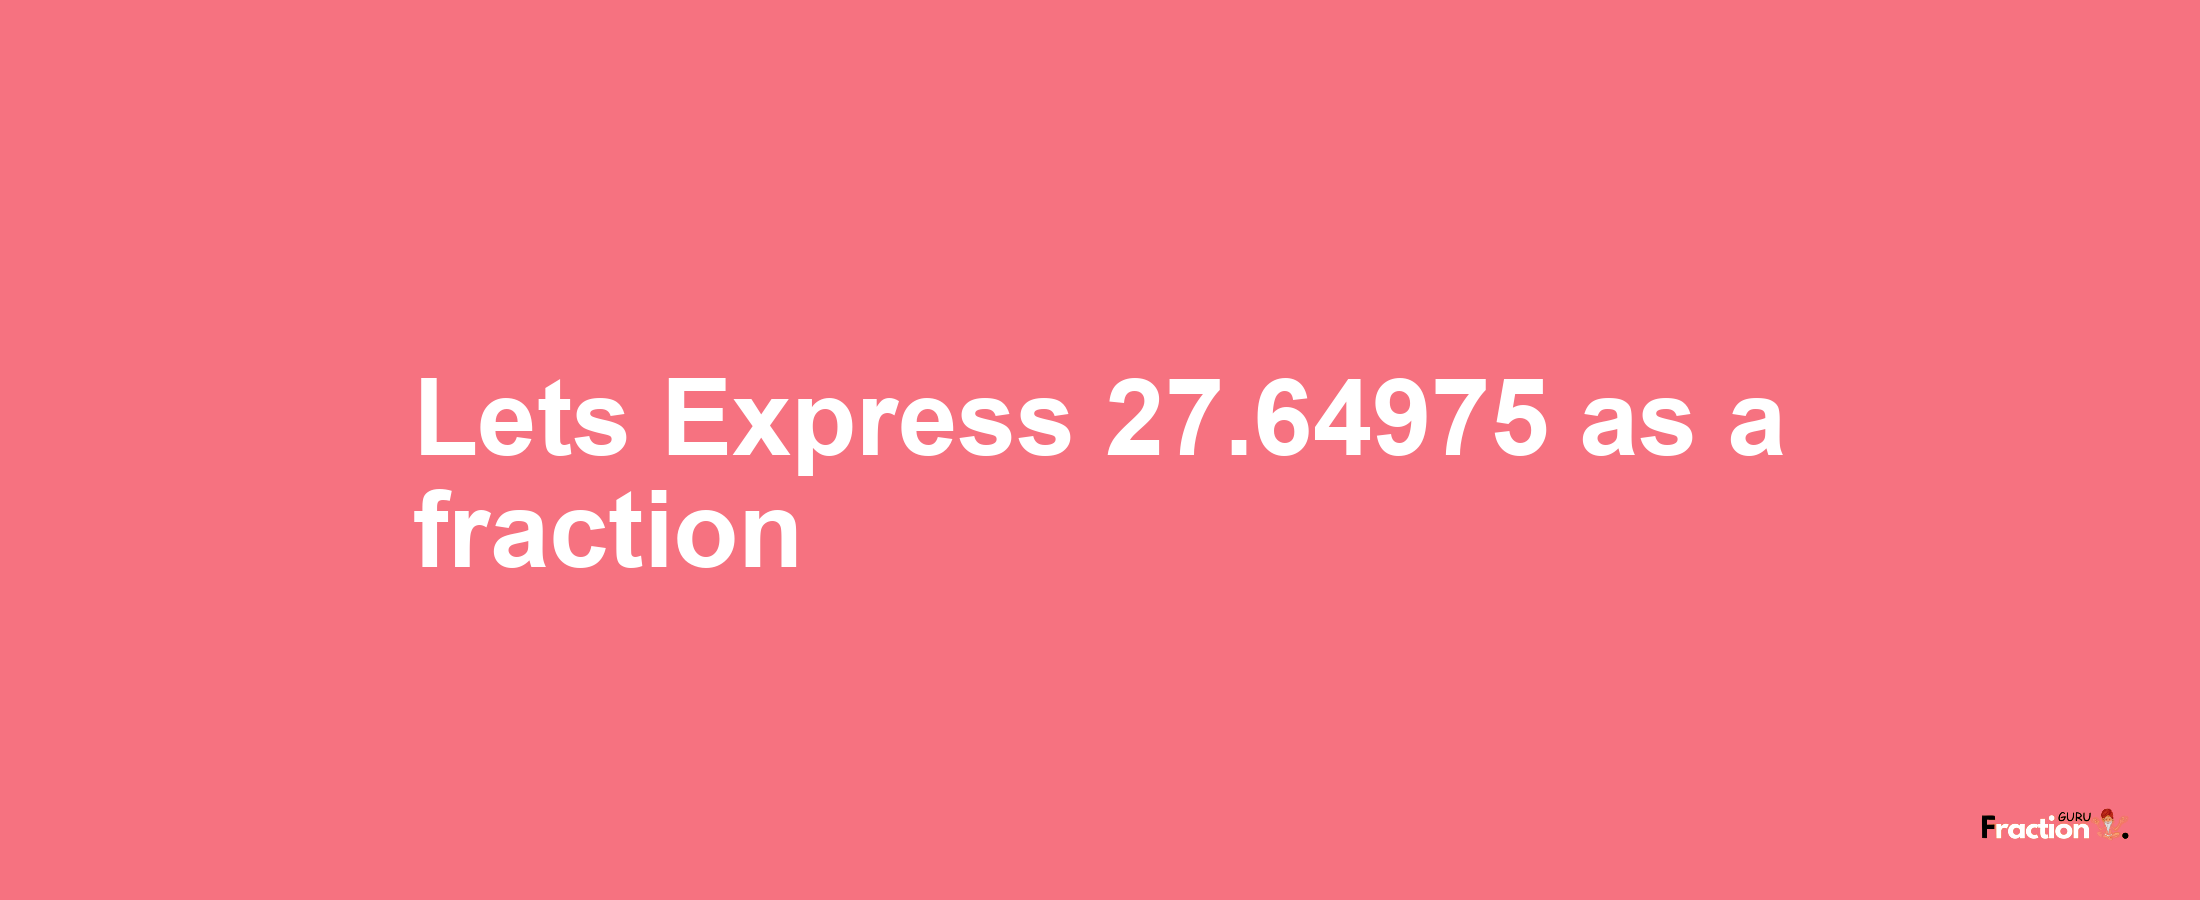 Lets Express 27.64975 as afraction